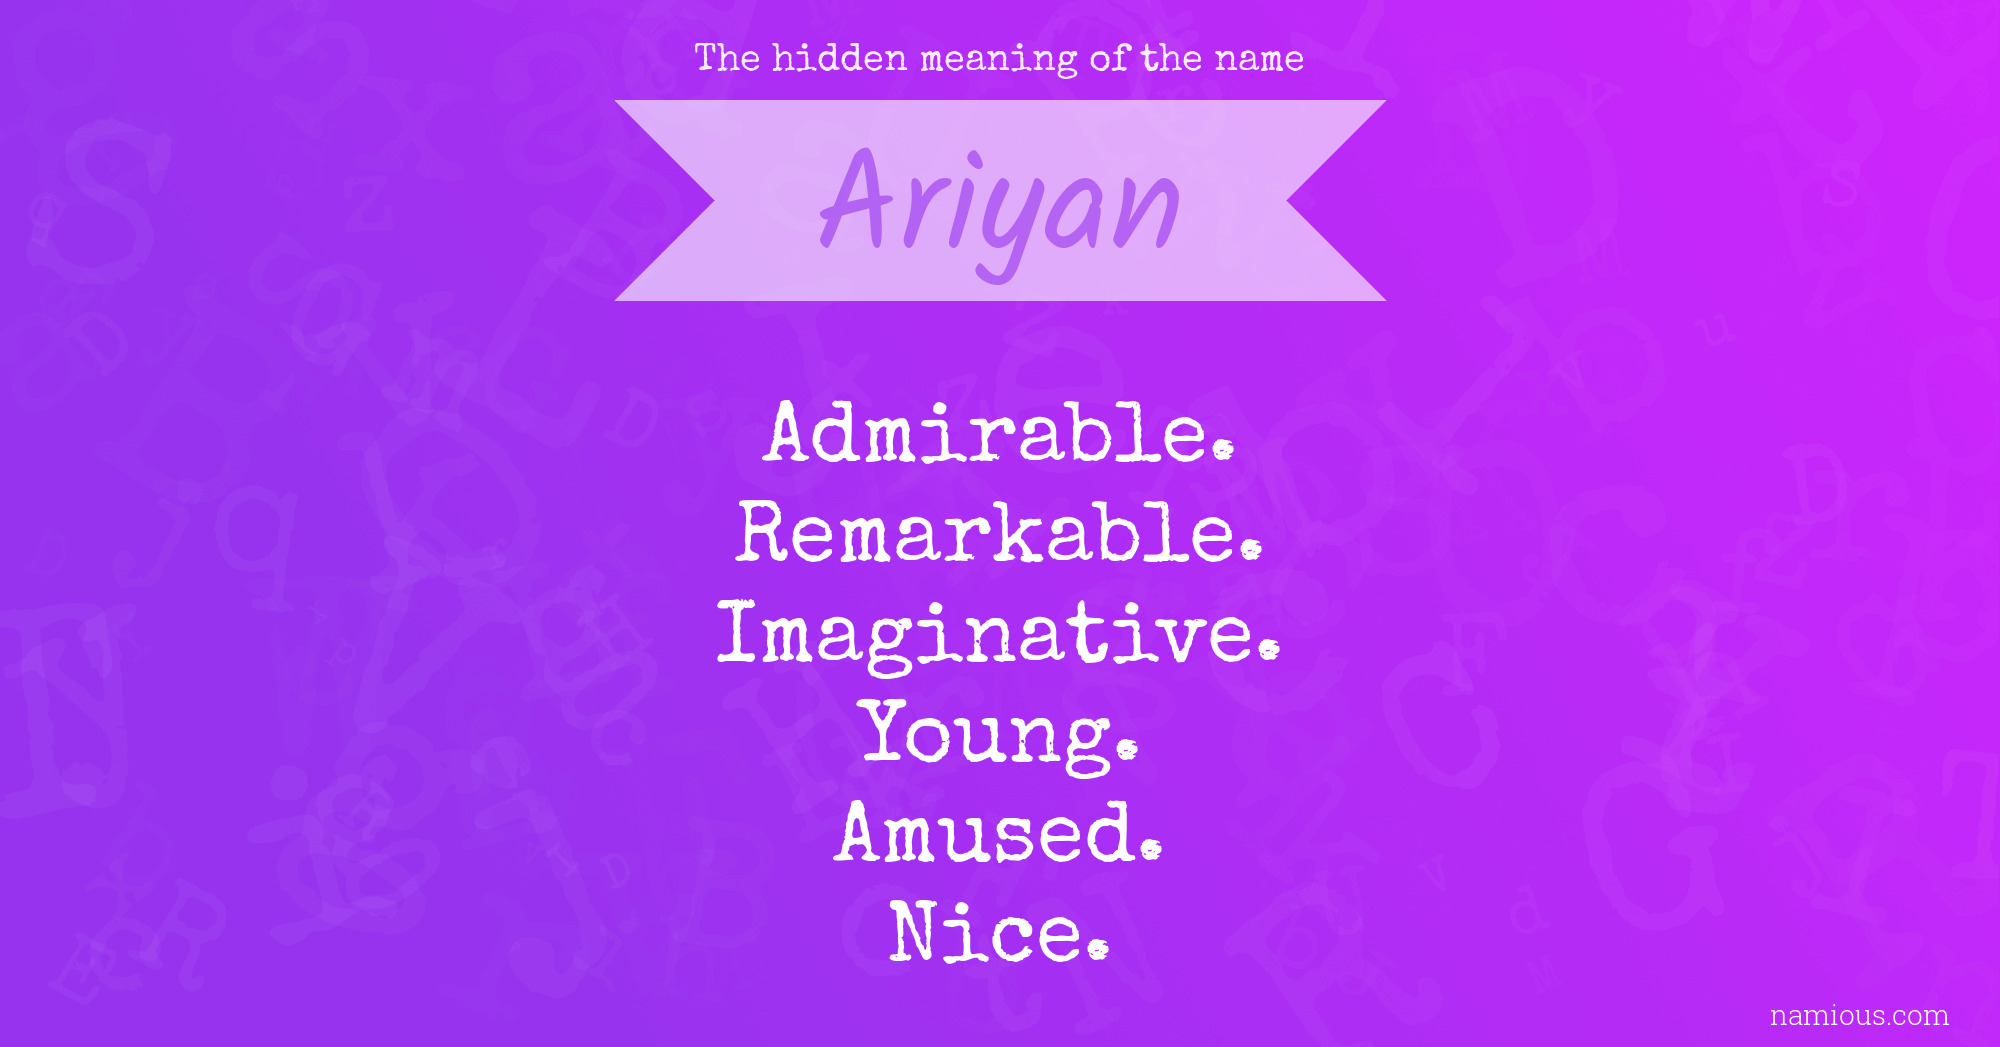 The hidden meaning of the name Ariyan